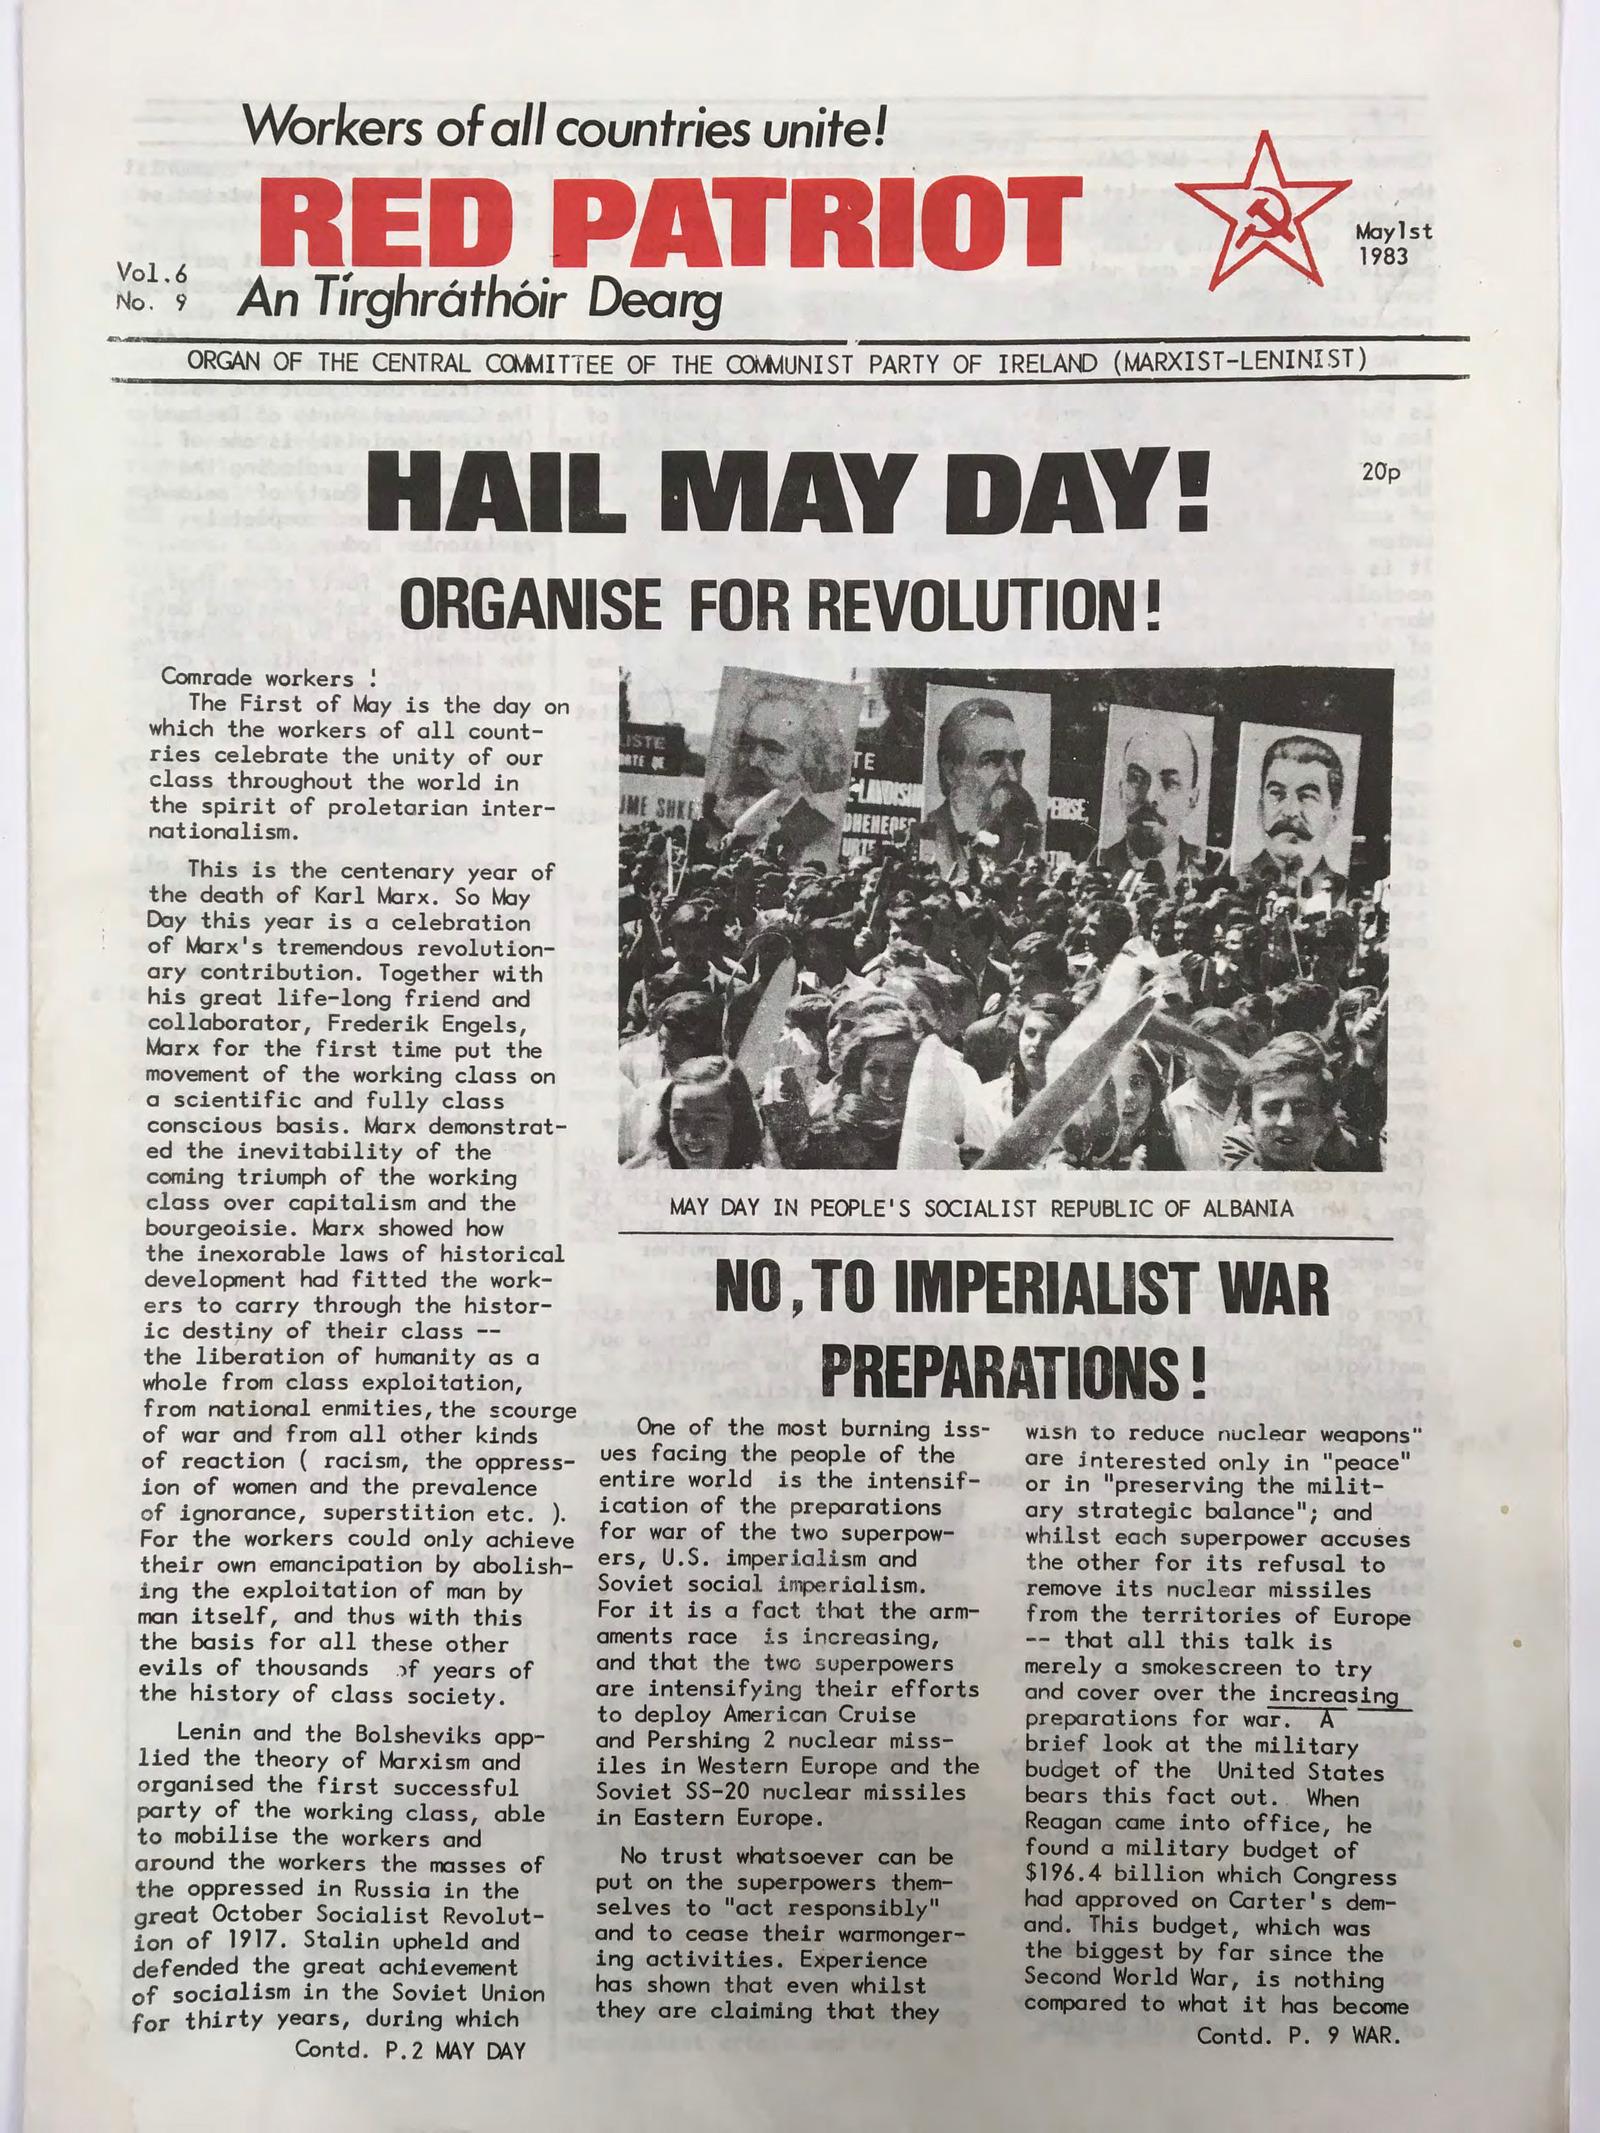 Front page of Red Patriot, from the Communist Party of Ireland (Marxist-Leninist) with the headline "Hail May Day! Organise for Revolution!"